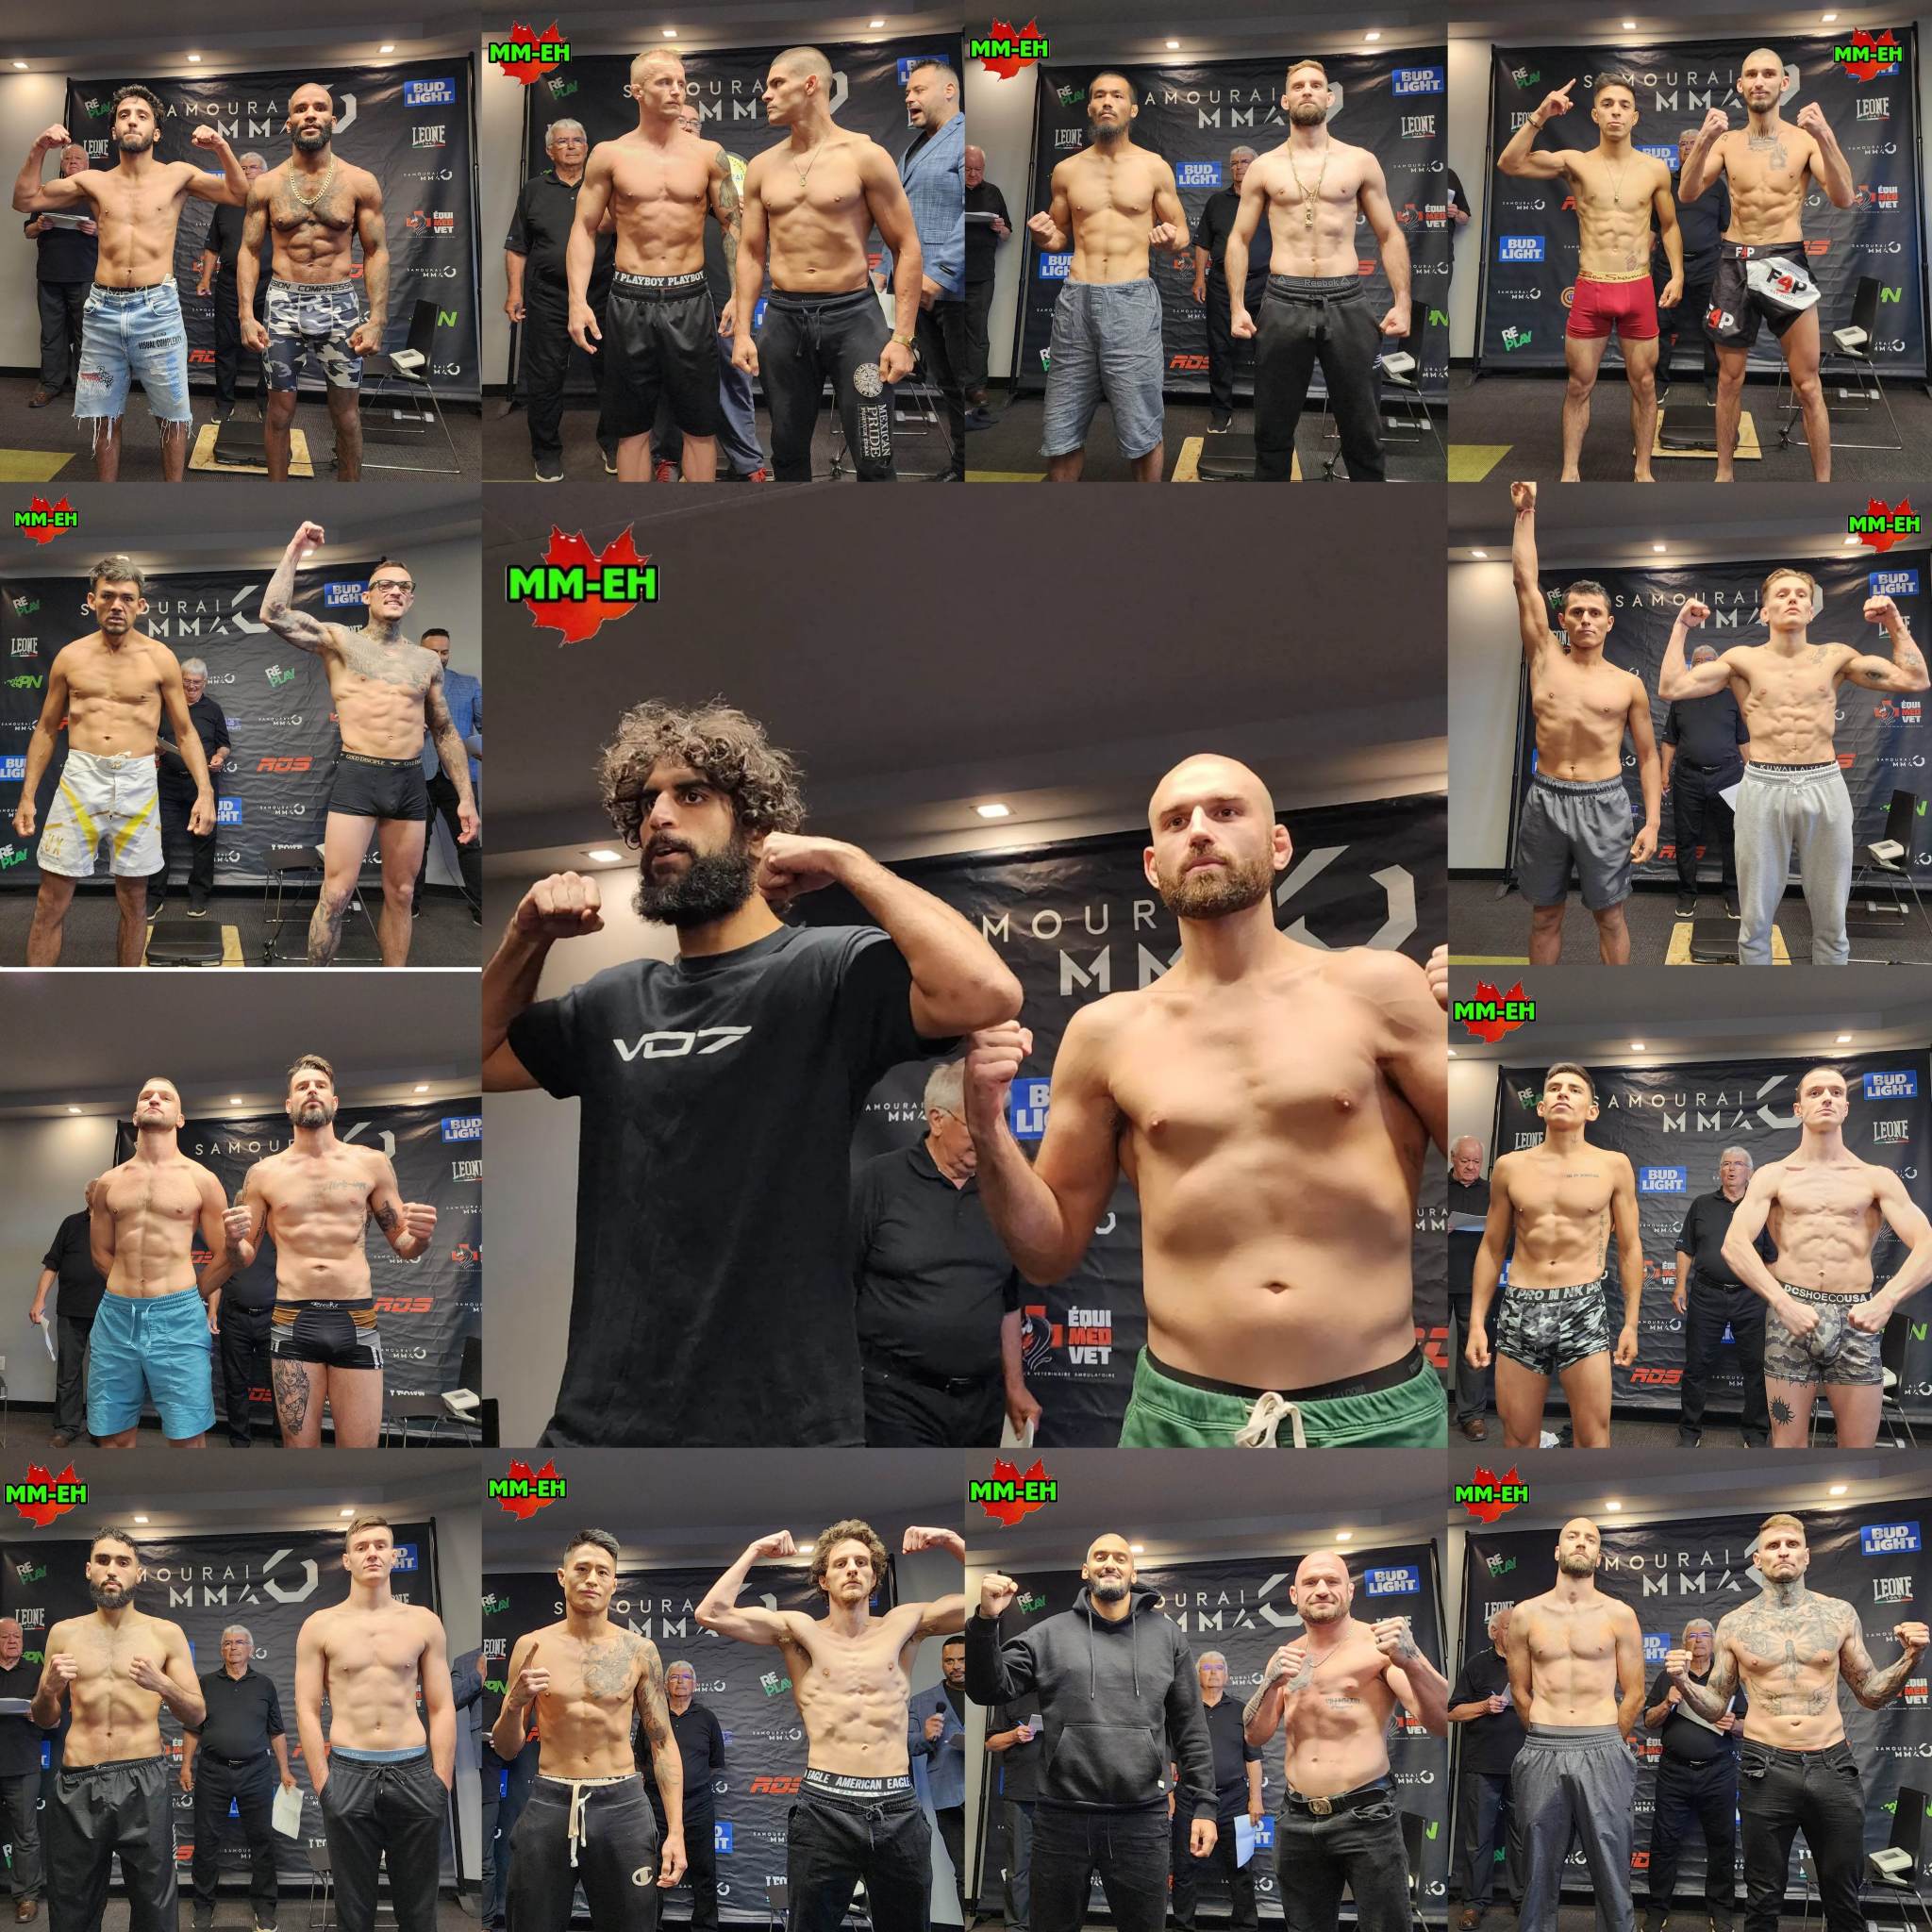 Samourai MMA 6 Weigh-In Results